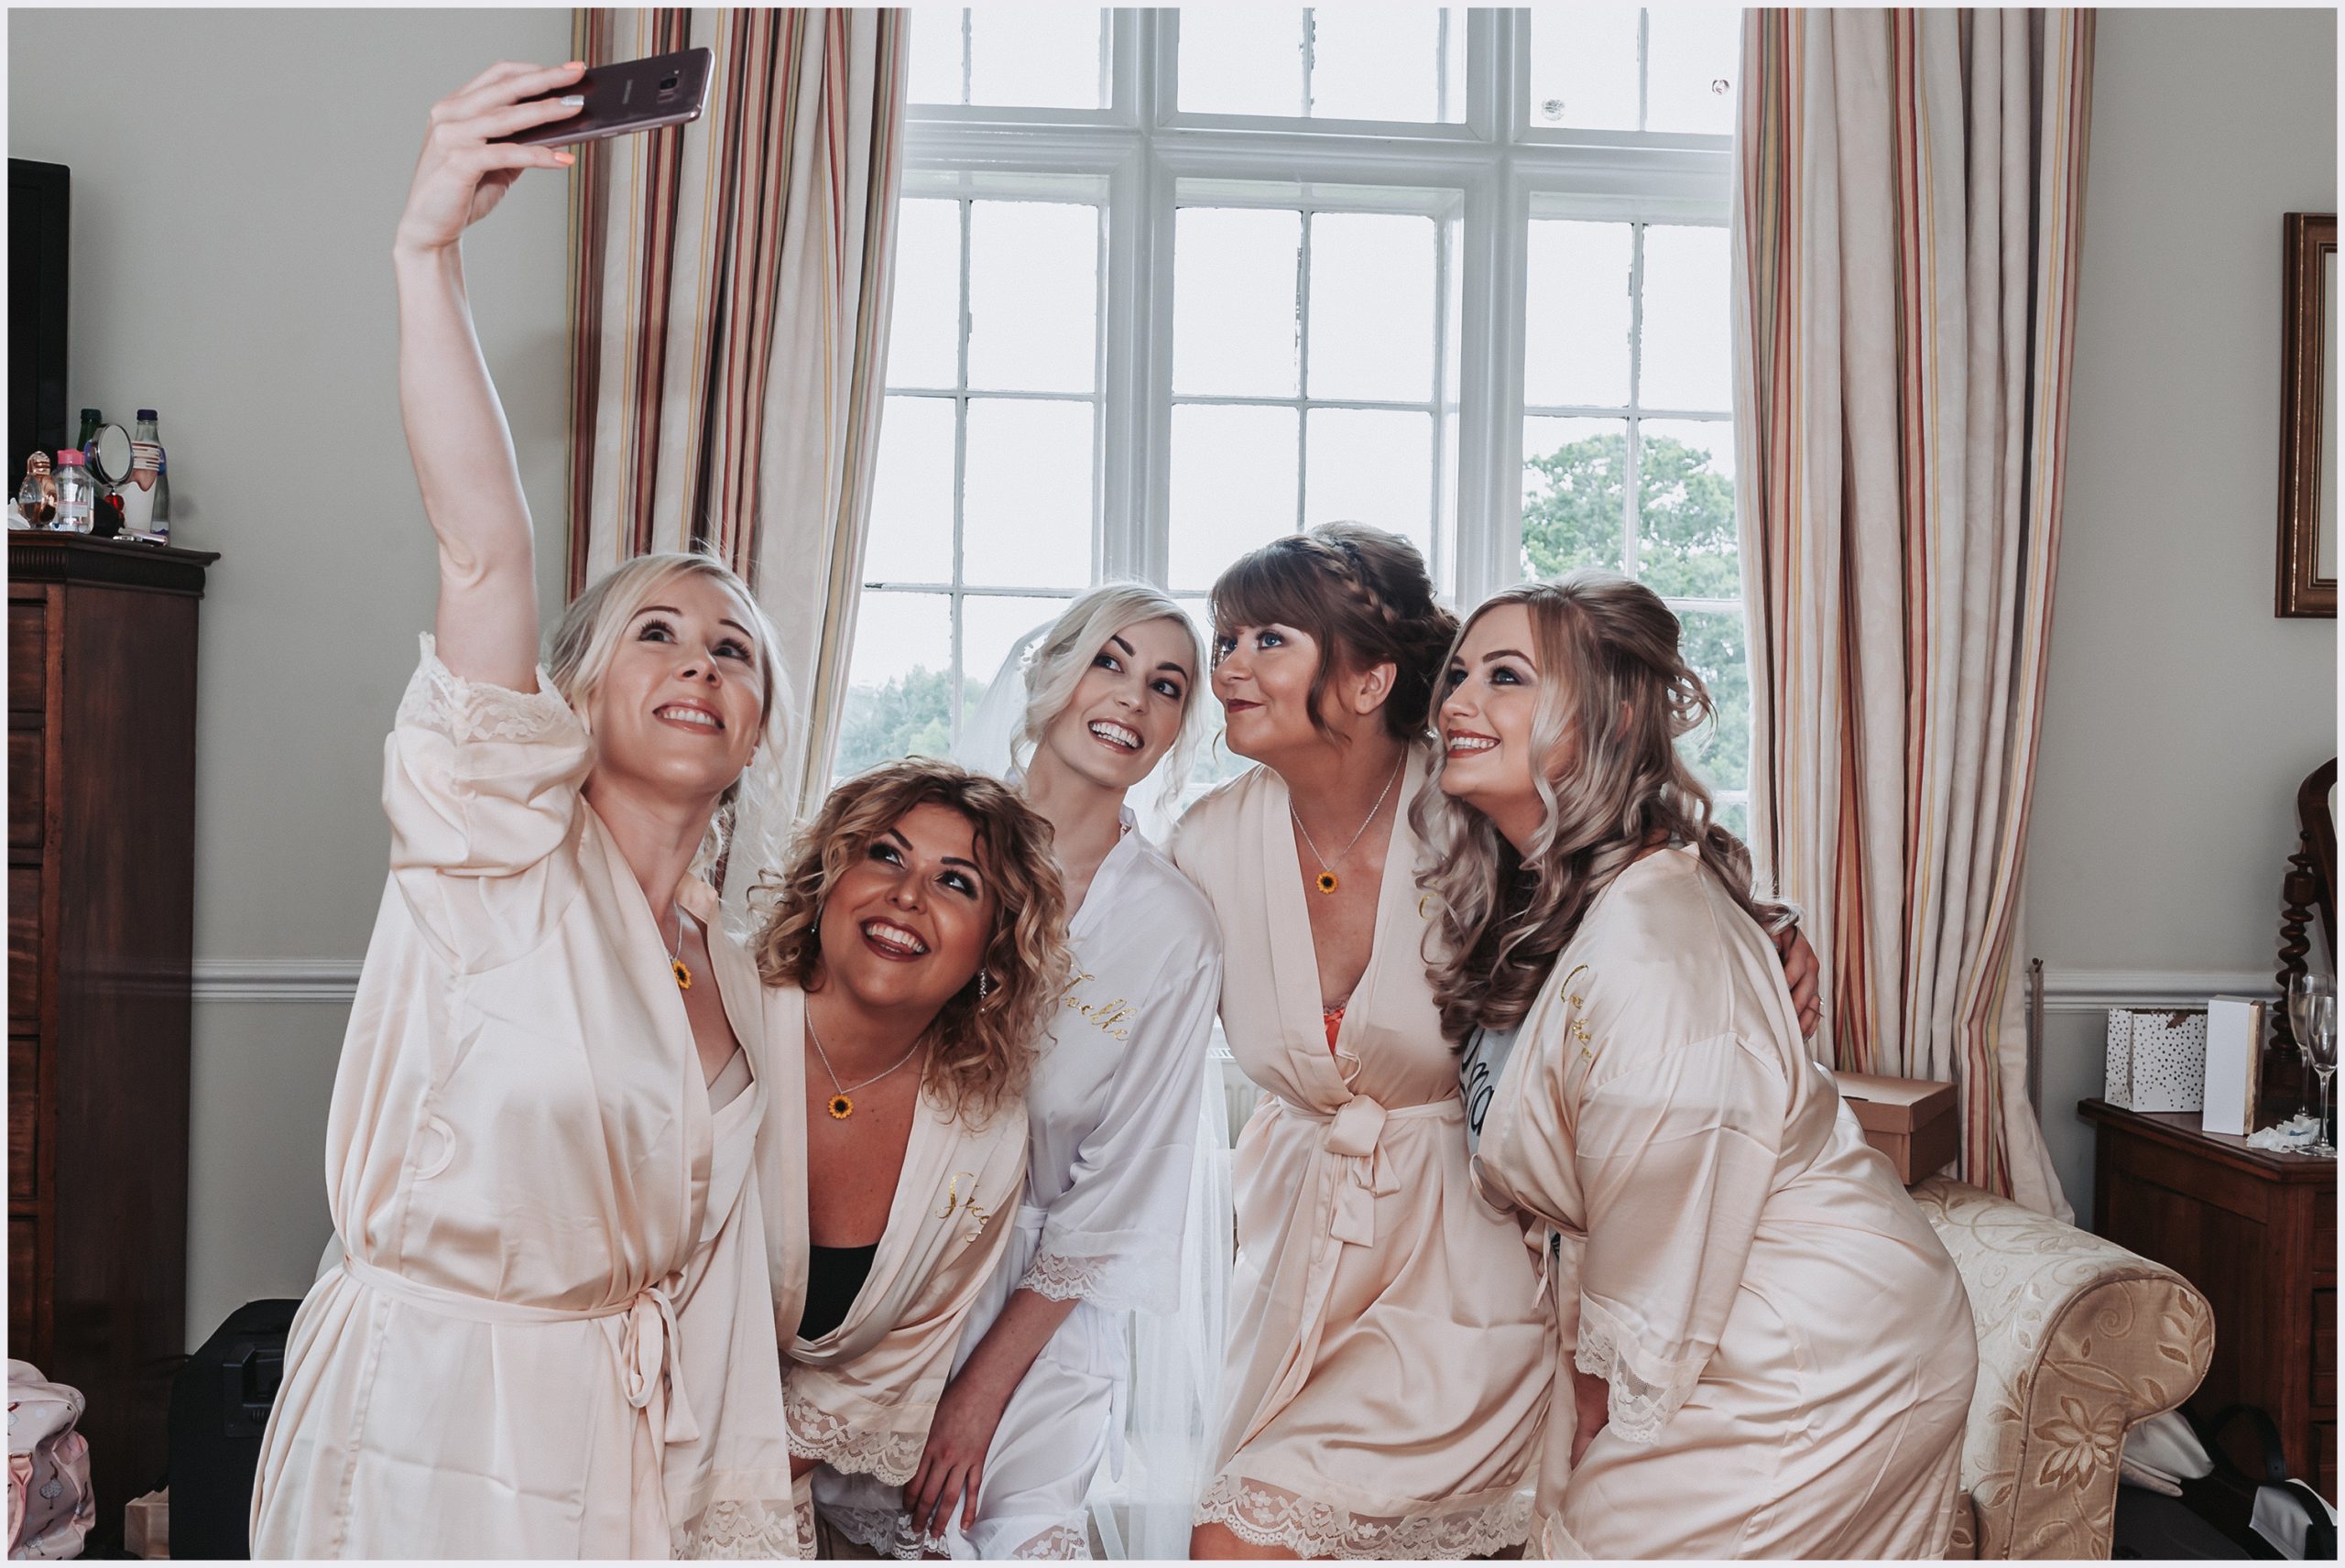 A beautiful bride and her bridesmaids wearing matching dressing gowns pose together for a selfie during the morning preparations.  Image captured at Willington Hall Hotel by Helena Jayne Photography a north Wales based photographer